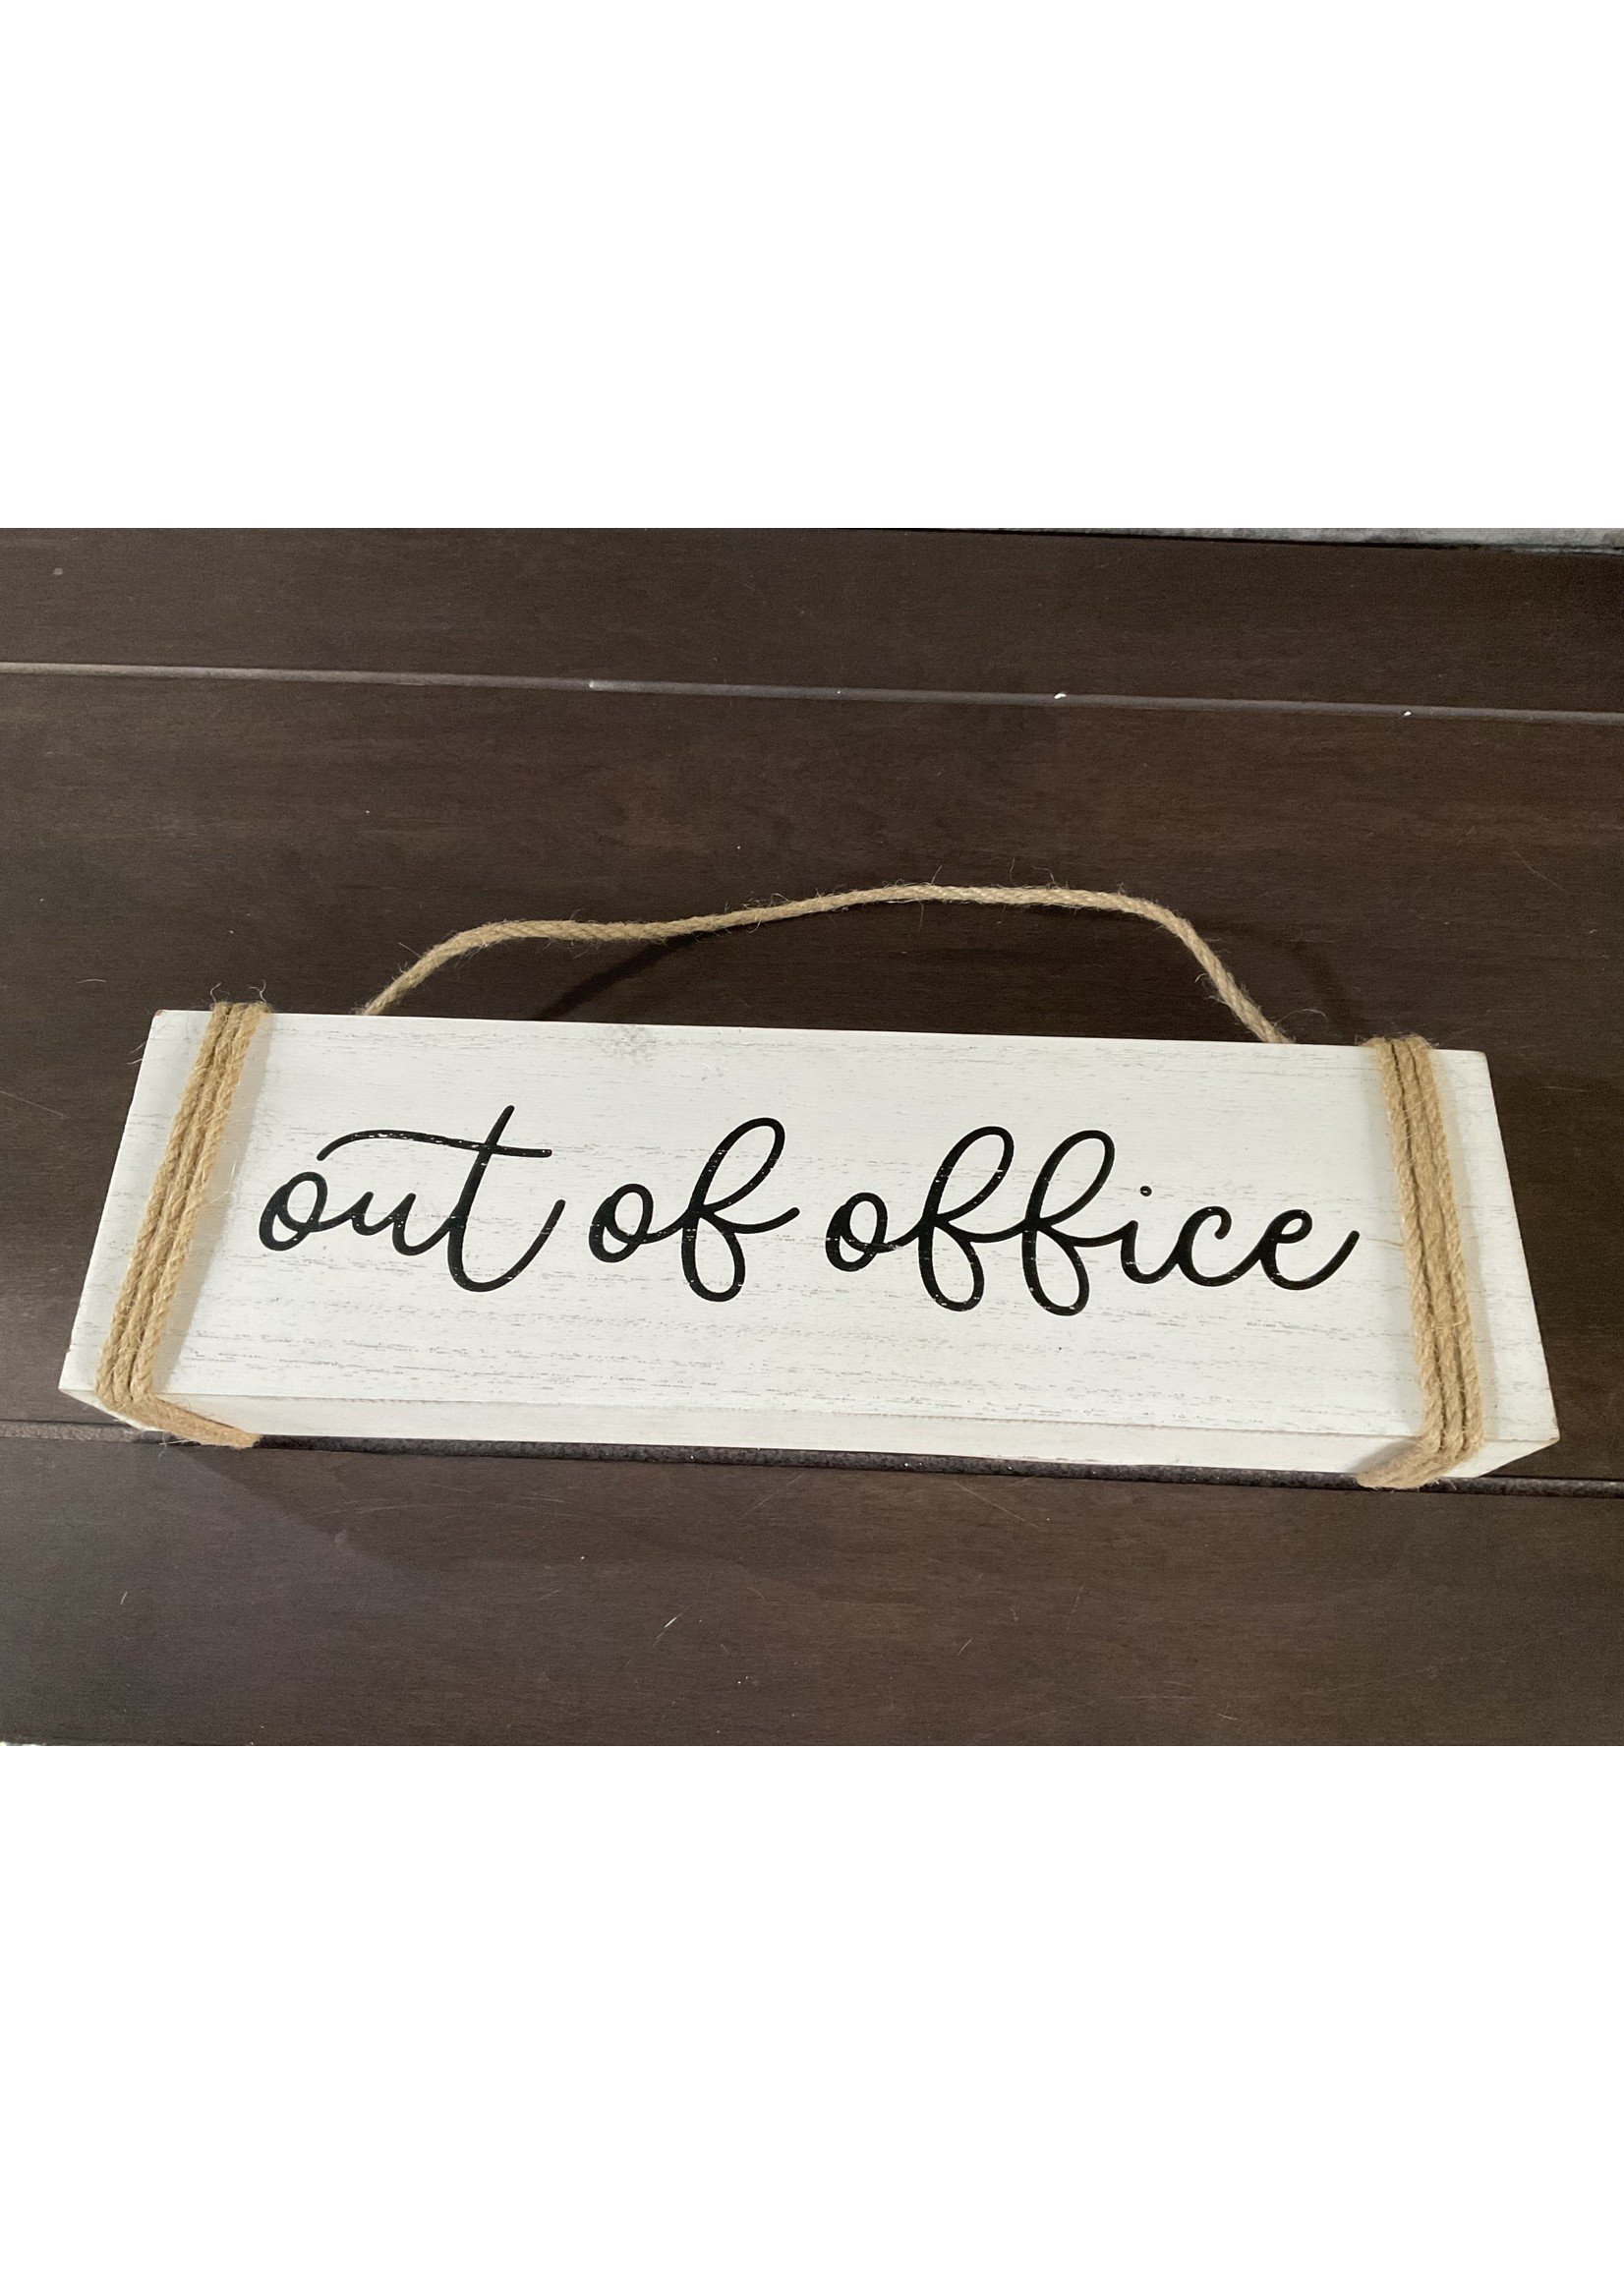 My New Favorite Thing Sign "Out of the Office" 4x12